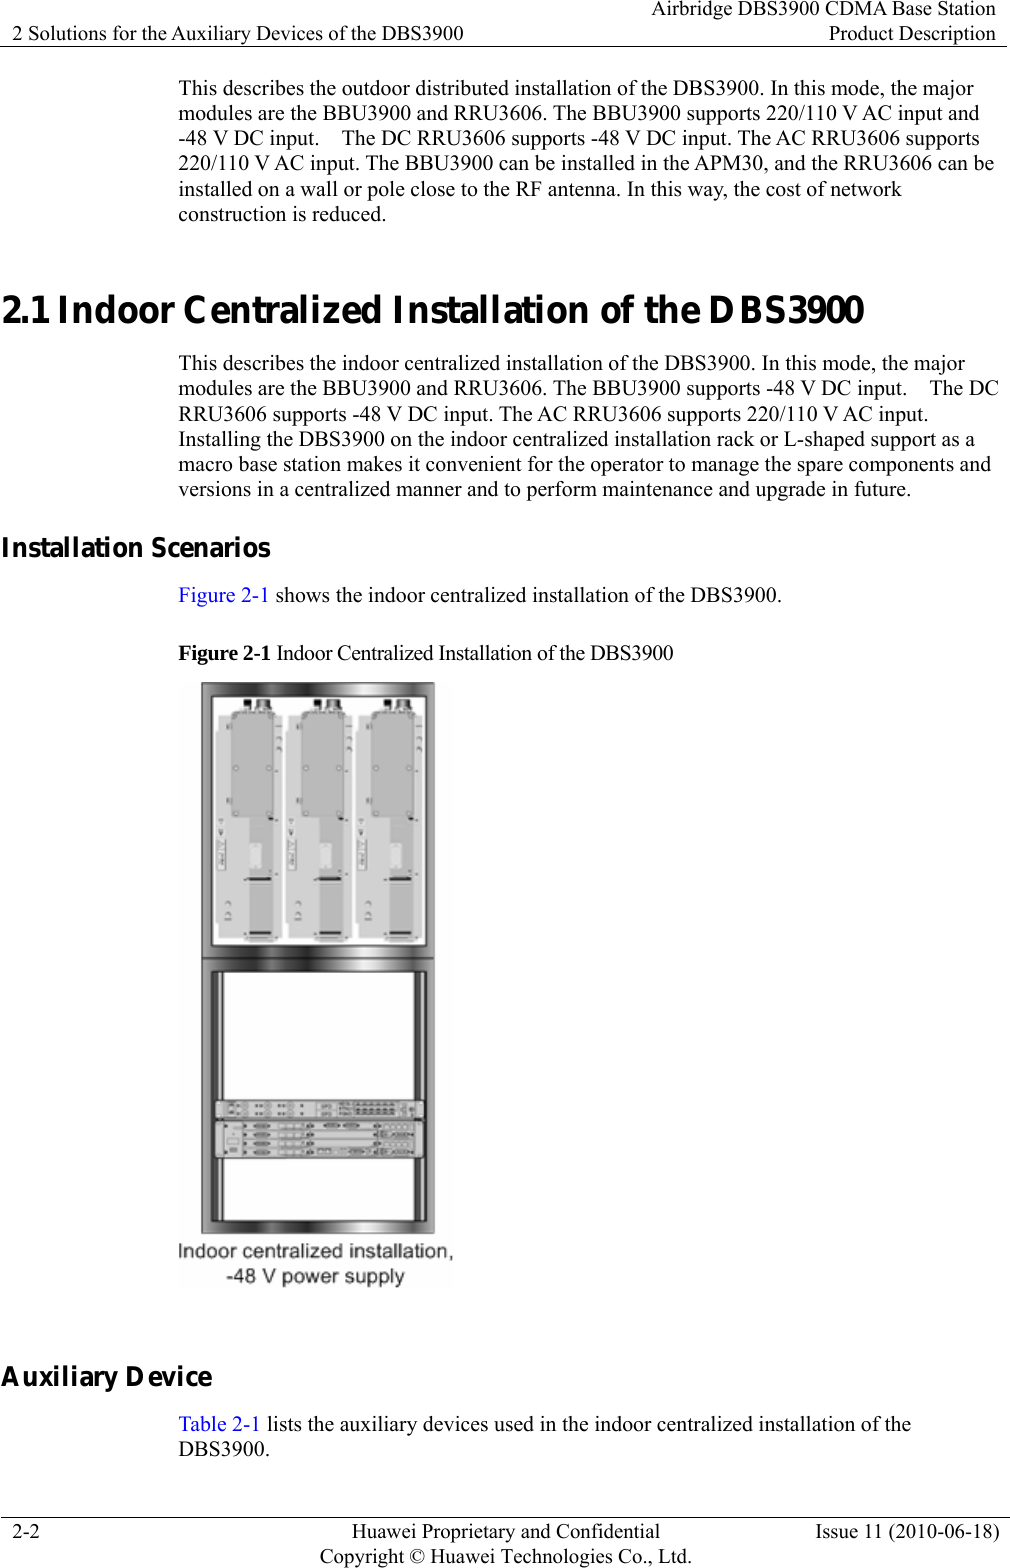 2 Solutions for the Auxiliary Devices of the DBS3900 Airbridge DBS3900 CDMA Base StationProduct Description 2-2  Huawei Proprietary and Confidential     Copyright © Huawei Technologies Co., Ltd.Issue 11 (2010-06-18) This describes the outdoor distributed installation of the DBS3900. In this mode, the major modules are the BBU3900 and RRU3606. The BBU3900 supports 220/110 V AC input and -48 V DC input.    The DC RRU3606 supports -48 V DC input. The AC RRU3606 supports 220/110 V AC input. The BBU3900 can be installed in the APM30, and the RRU3606 can be installed on a wall or pole close to the RF antenna. In this way, the cost of network construction is reduced. 2.1 Indoor Centralized Installation of the DBS3900 This describes the indoor centralized installation of the DBS3900. In this mode, the major modules are the BBU3900 and RRU3606. The BBU3900 supports -48 V DC input.    The DC RRU3606 supports -48 V DC input. The AC RRU3606 supports 220/110 V AC input. Installing the DBS3900 on the indoor centralized installation rack or L-shaped support as a macro base station makes it convenient for the operator to manage the spare components and versions in a centralized manner and to perform maintenance and upgrade in future. Installation Scenarios Figure 2-1 shows the indoor centralized installation of the DBS3900. Figure 2-1 Indoor Centralized Installation of the DBS3900   Auxiliary Device Table 2-1 lists the auxiliary devices used in the indoor centralized installation of the DBS3900. 